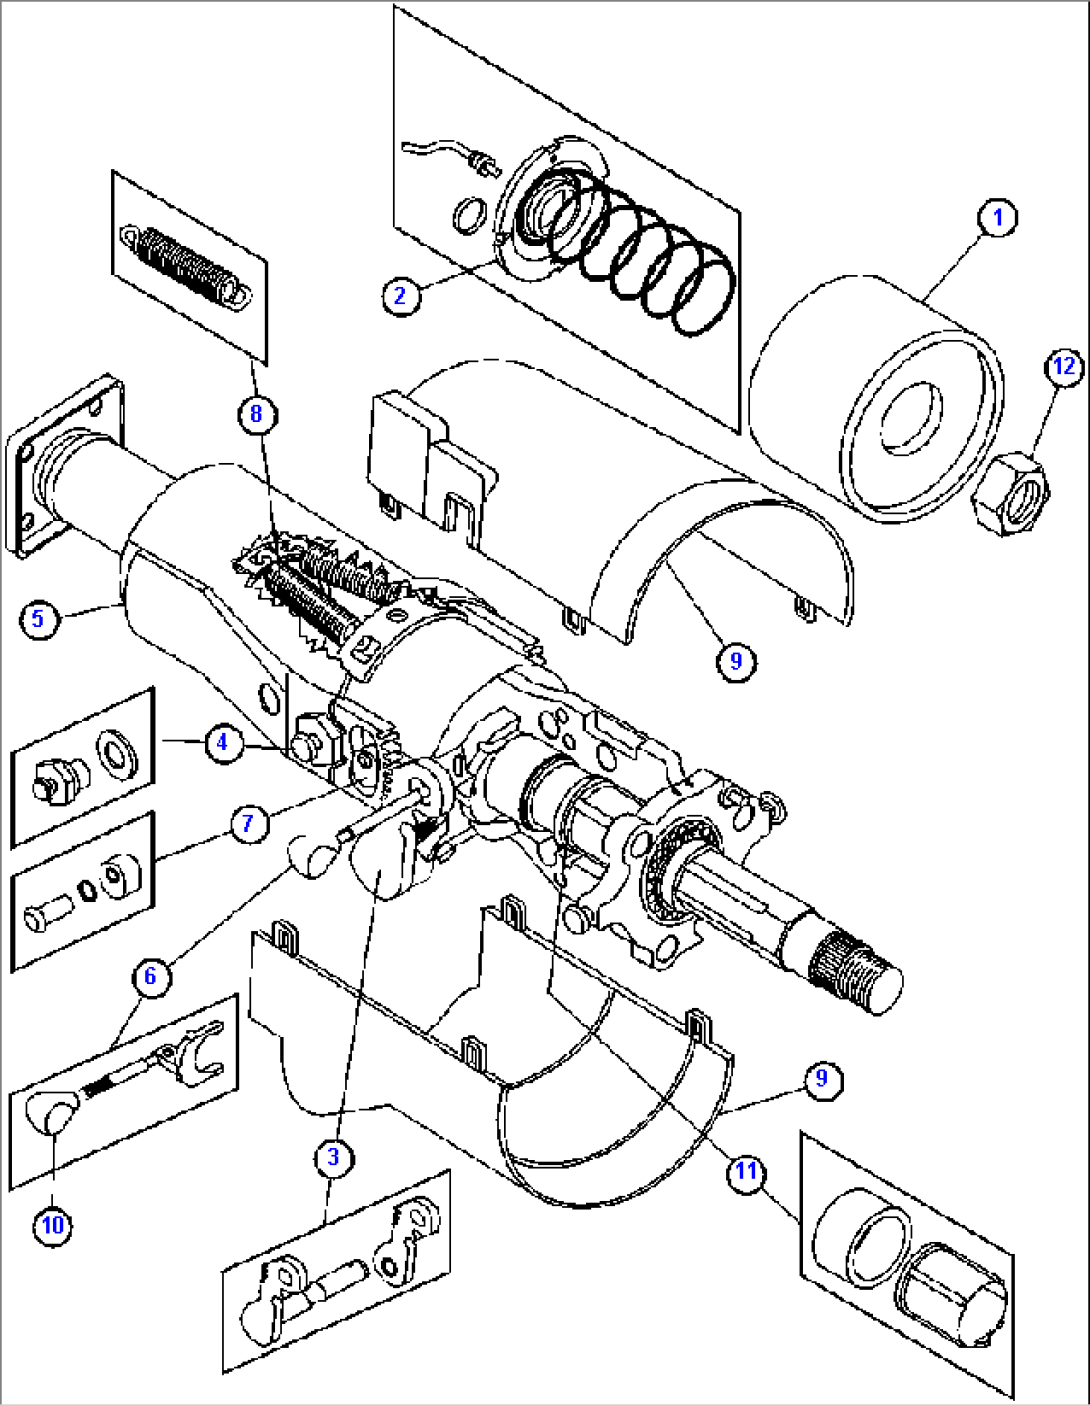 STEERING COLUMN ASSEMBLY (PC1287)